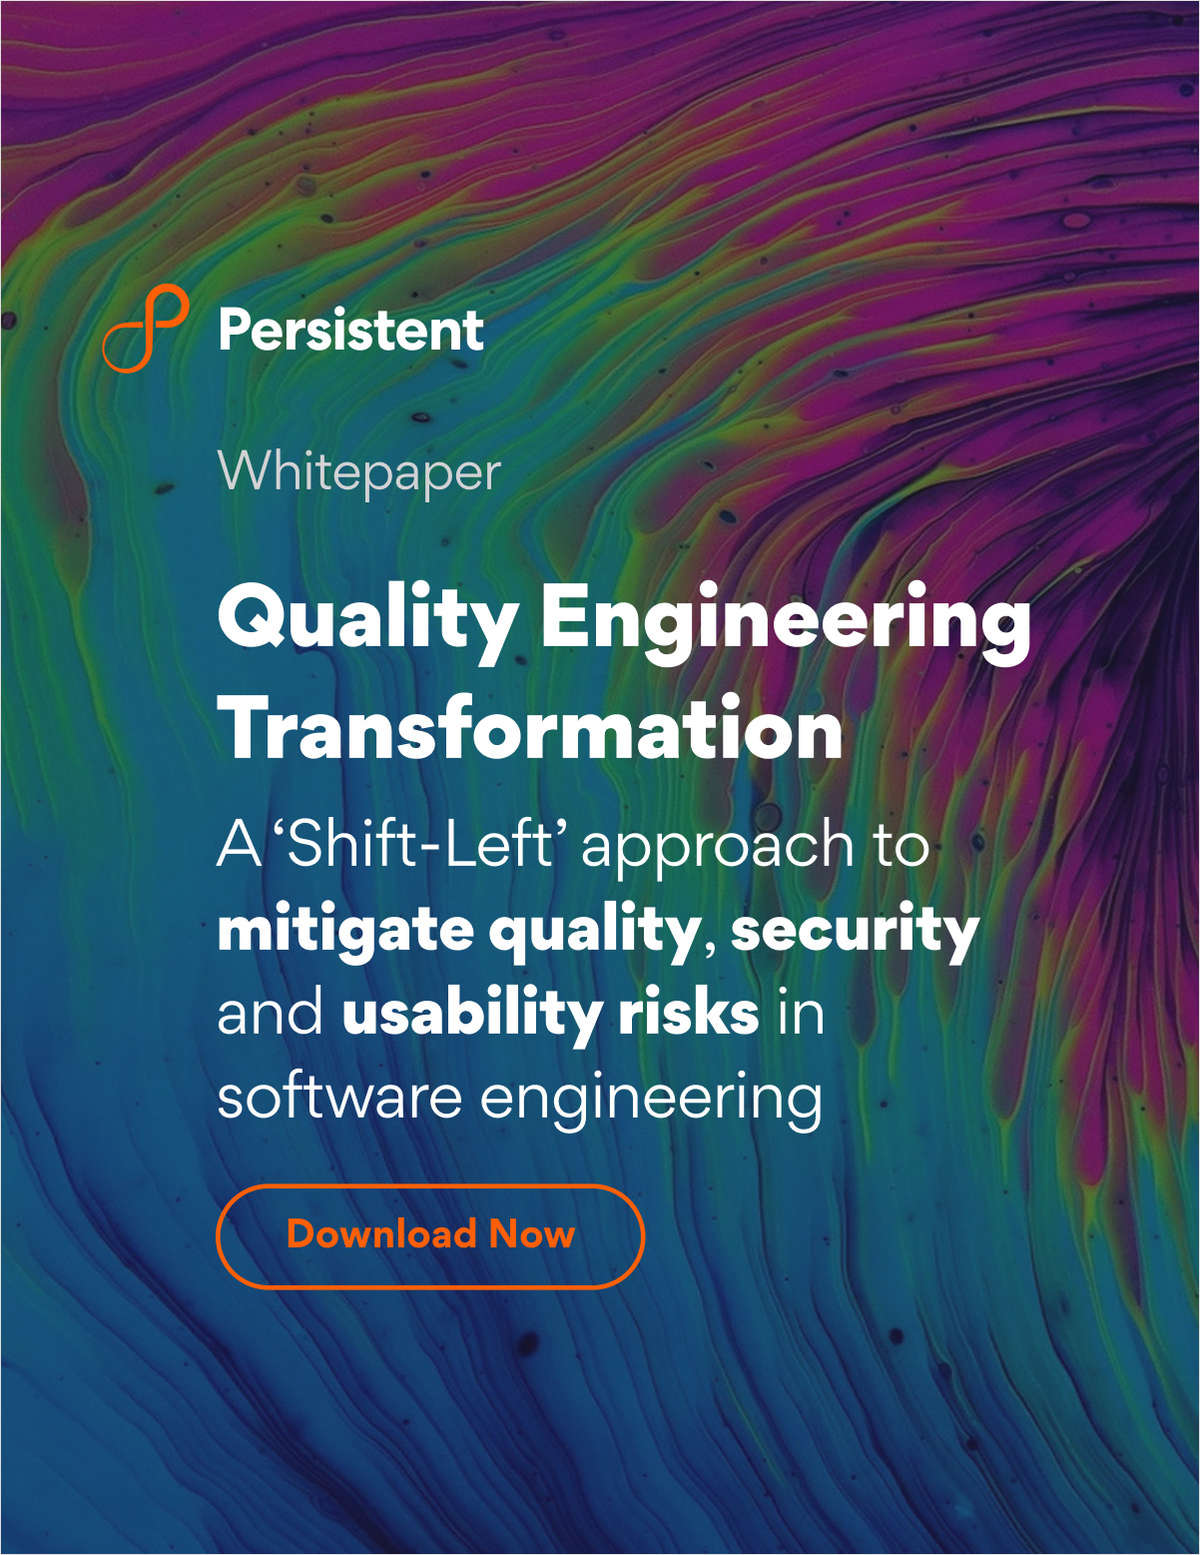 Quality Engineering Transformation: A 'Shift-Left' approach to mitigate quality, security and usability risks in software engineering